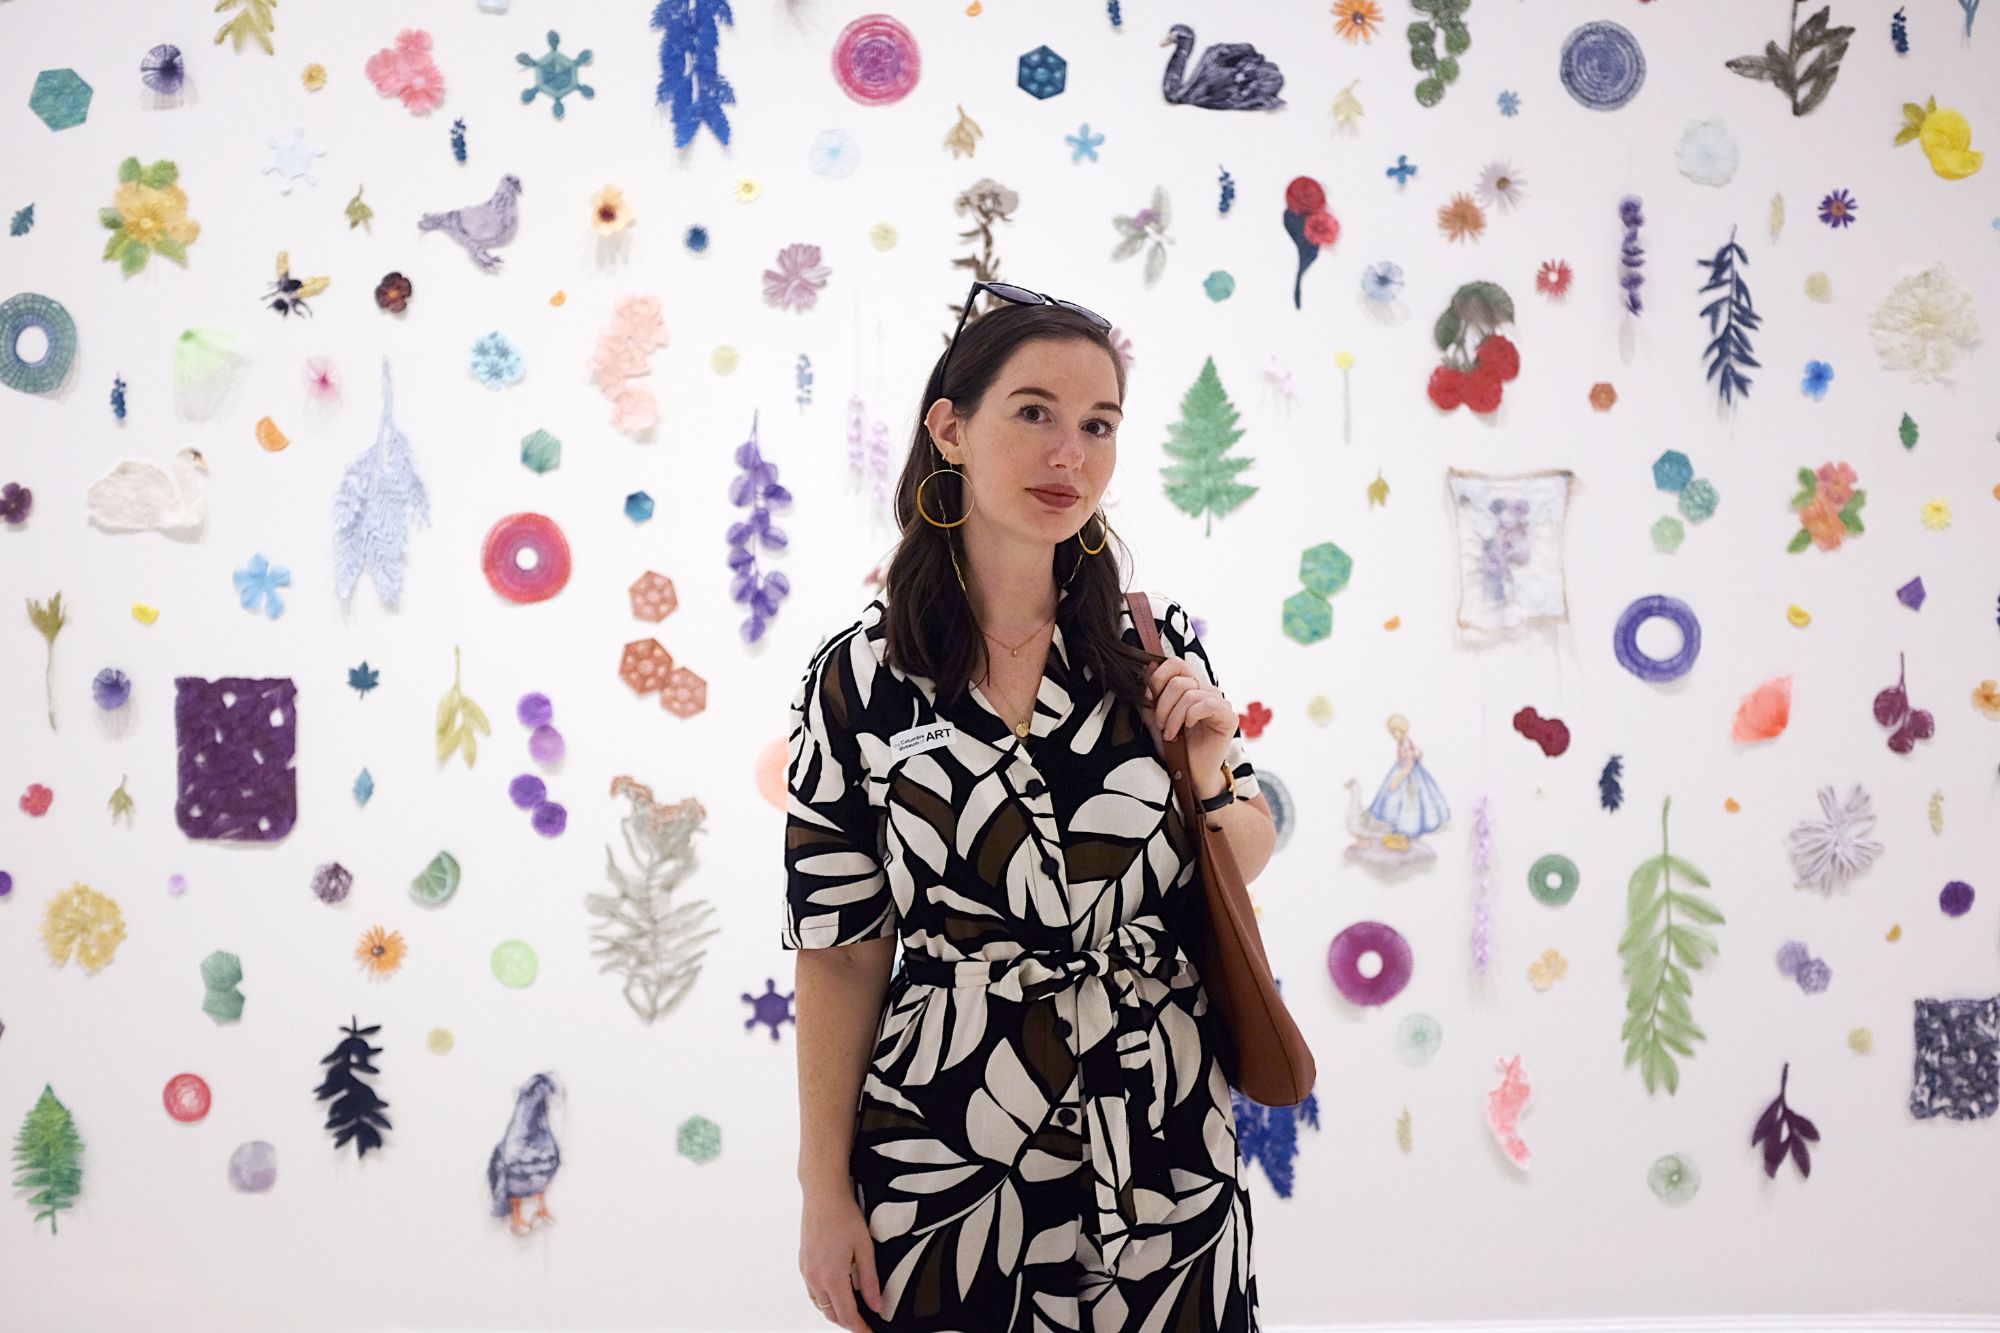 Alyssa wears a botanical jumpsuit and stands in front of an art display